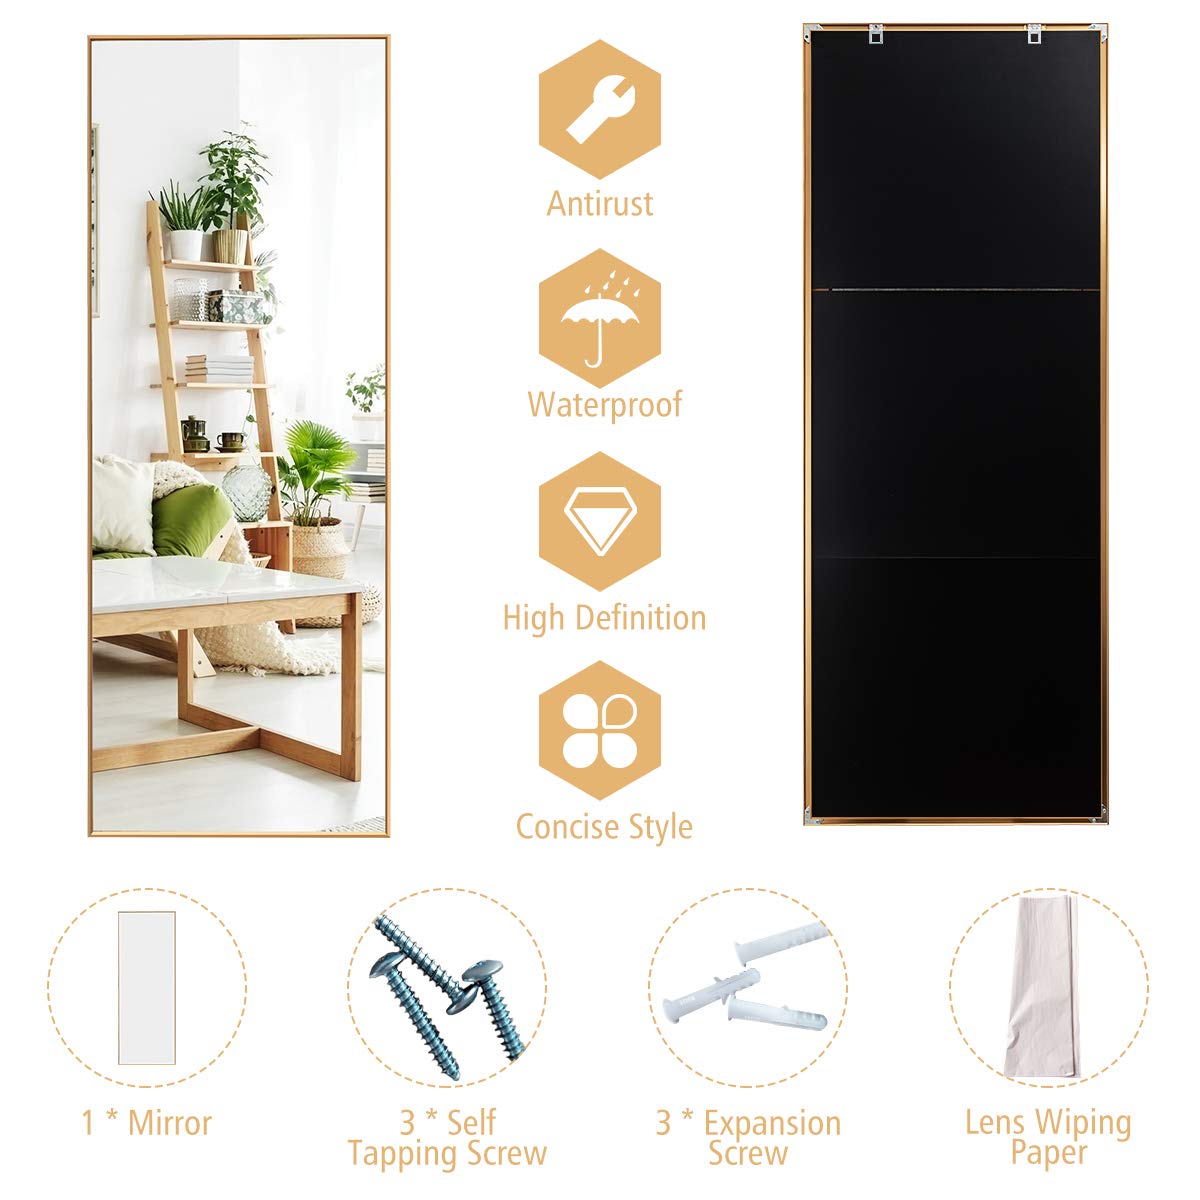 CHARMAID Full Length Mirror, 59inch x 22inch Large Rectangle Bedroom Mirror